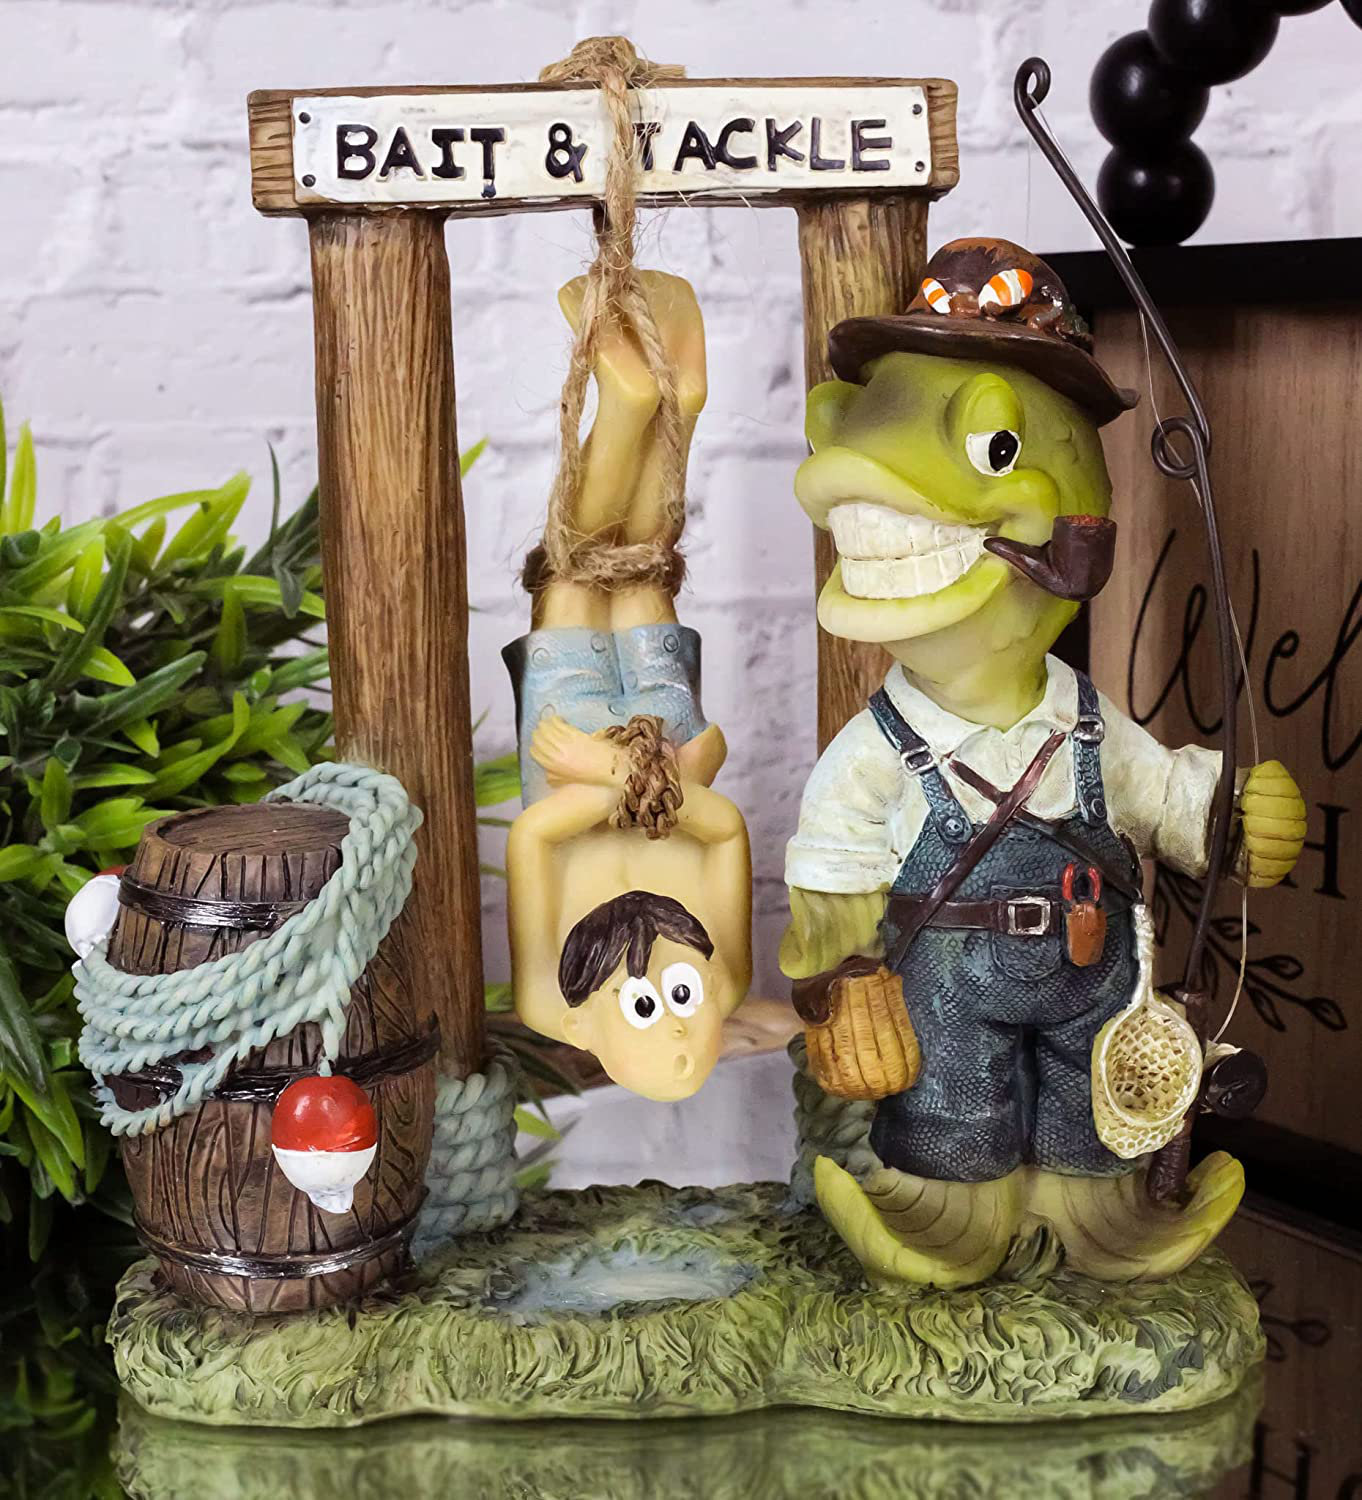 Trinx Whimsical Bait and Tackle Station by Wharf Getty Sea Bass Fish with Fishing Pole Capturing Tied Up Fisherman Figurine Funny Comical Animated SCU